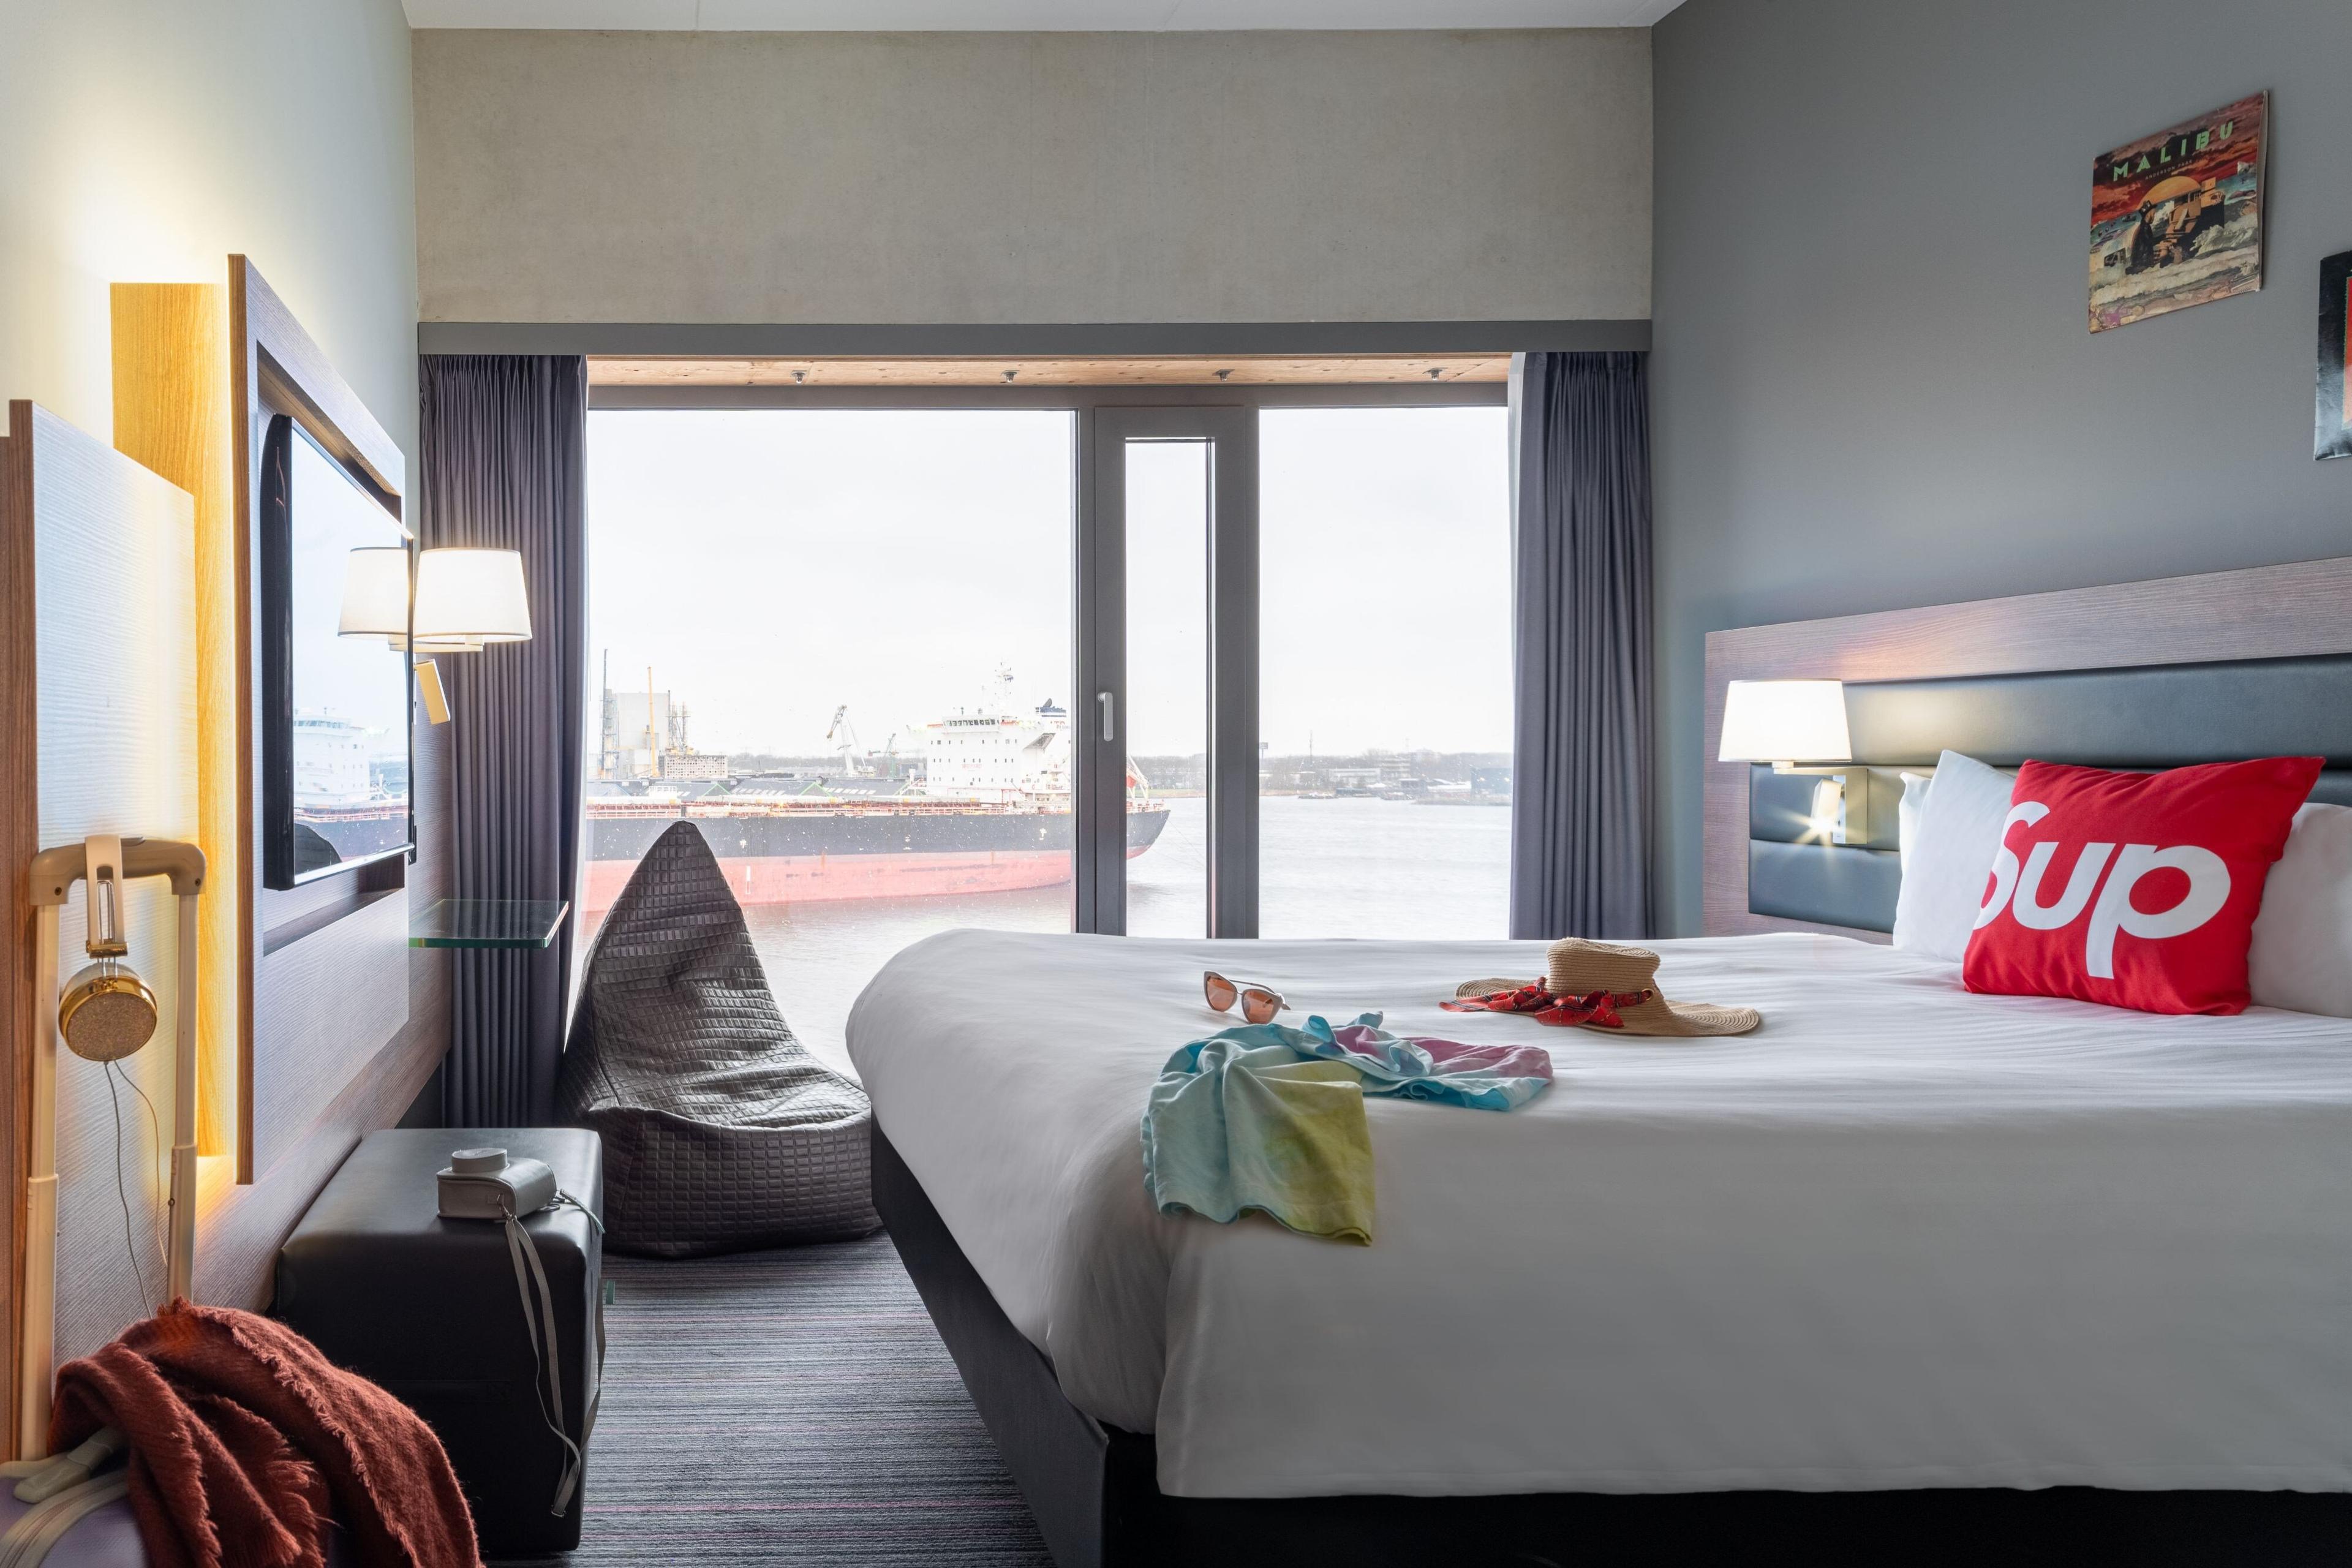 Moxy Sleeper Lookout Queen rooms boast breathtaking views of the Amsterdam harbor scene through dramatic floor to ceiling windows.